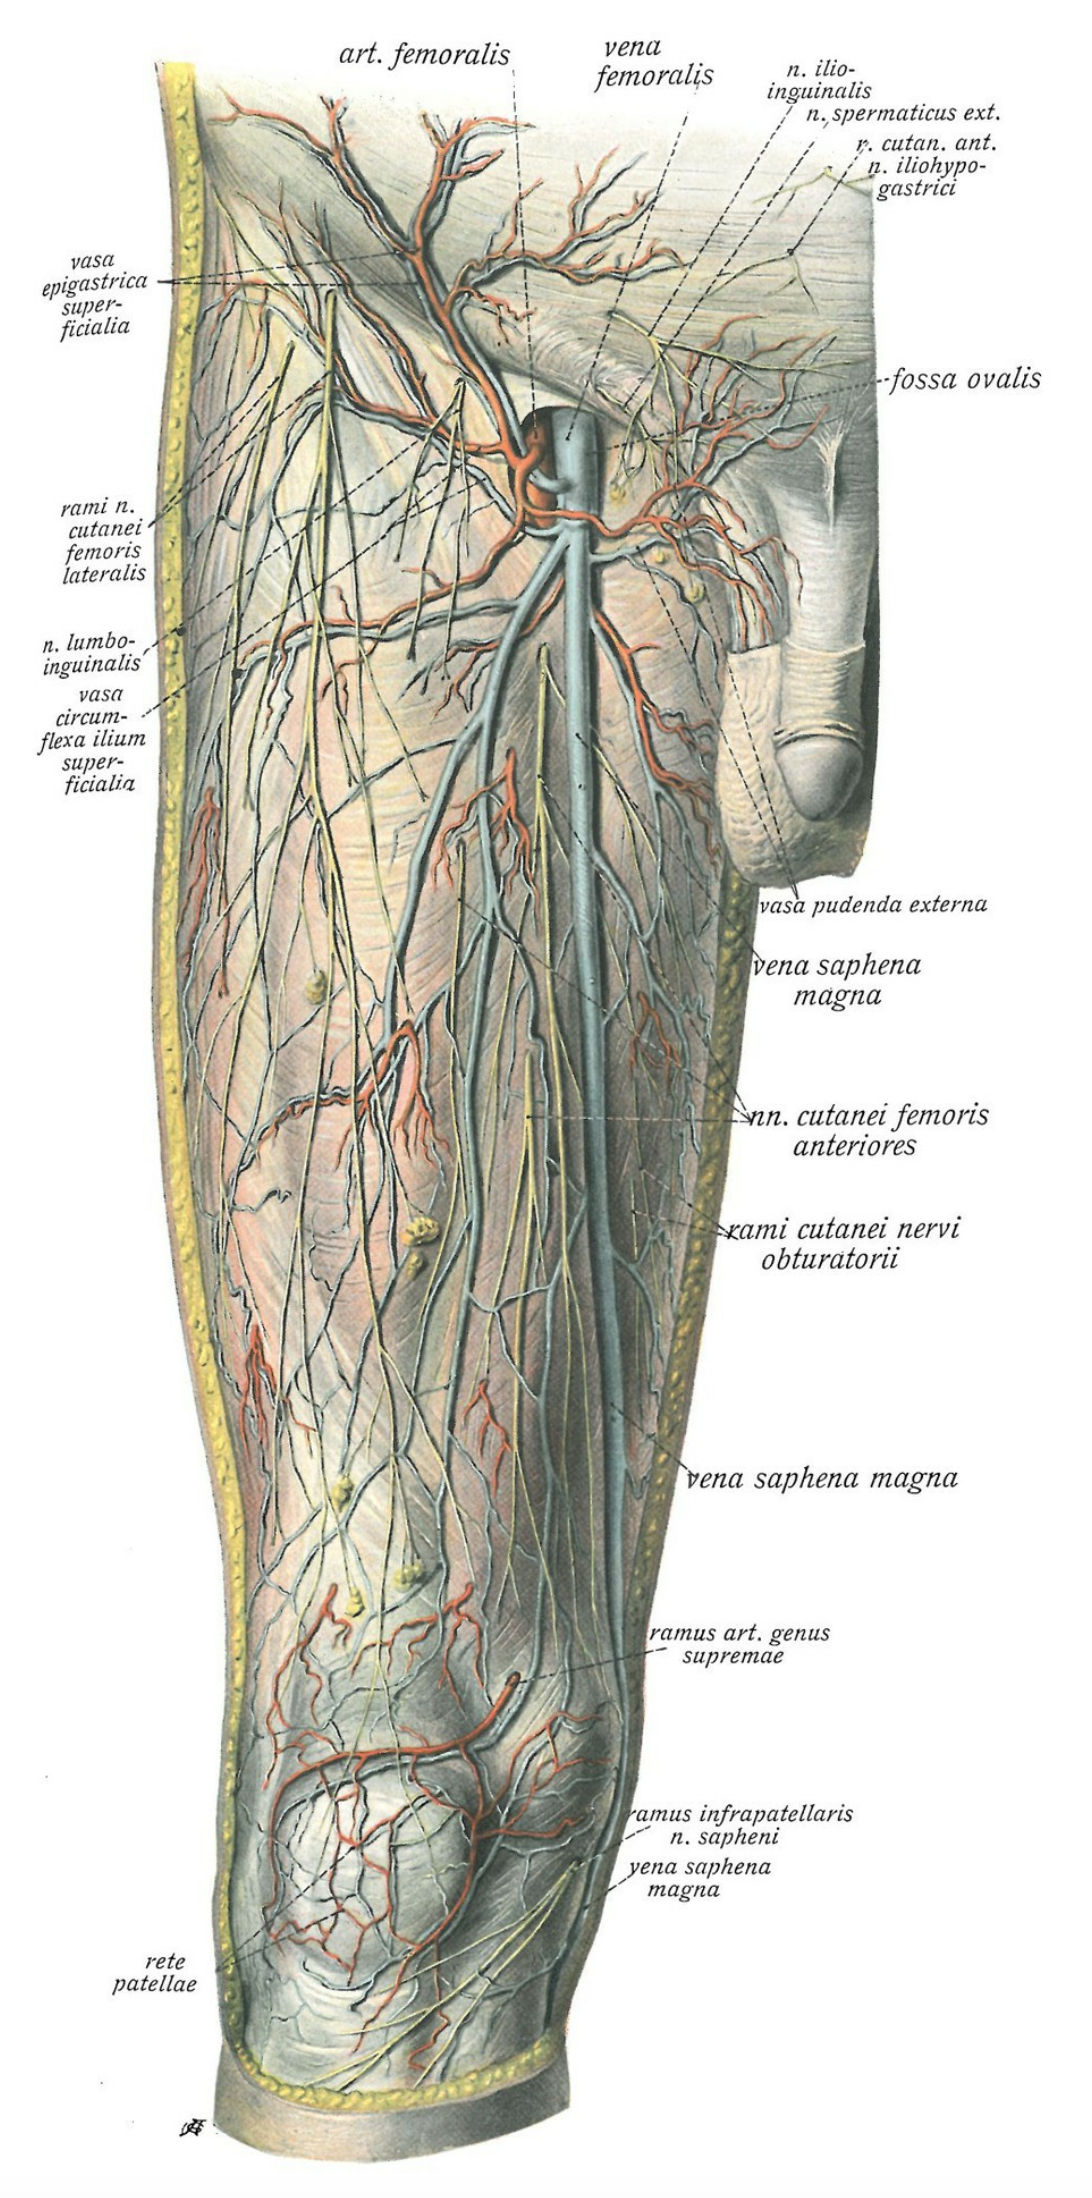  The superficial medial region of each leg drains into the Saphena Magna, which ascends along the leg and into the thigh to join the proximal femoral vein (saphenofemoral junction) below its entrance to the inguinal canal. 